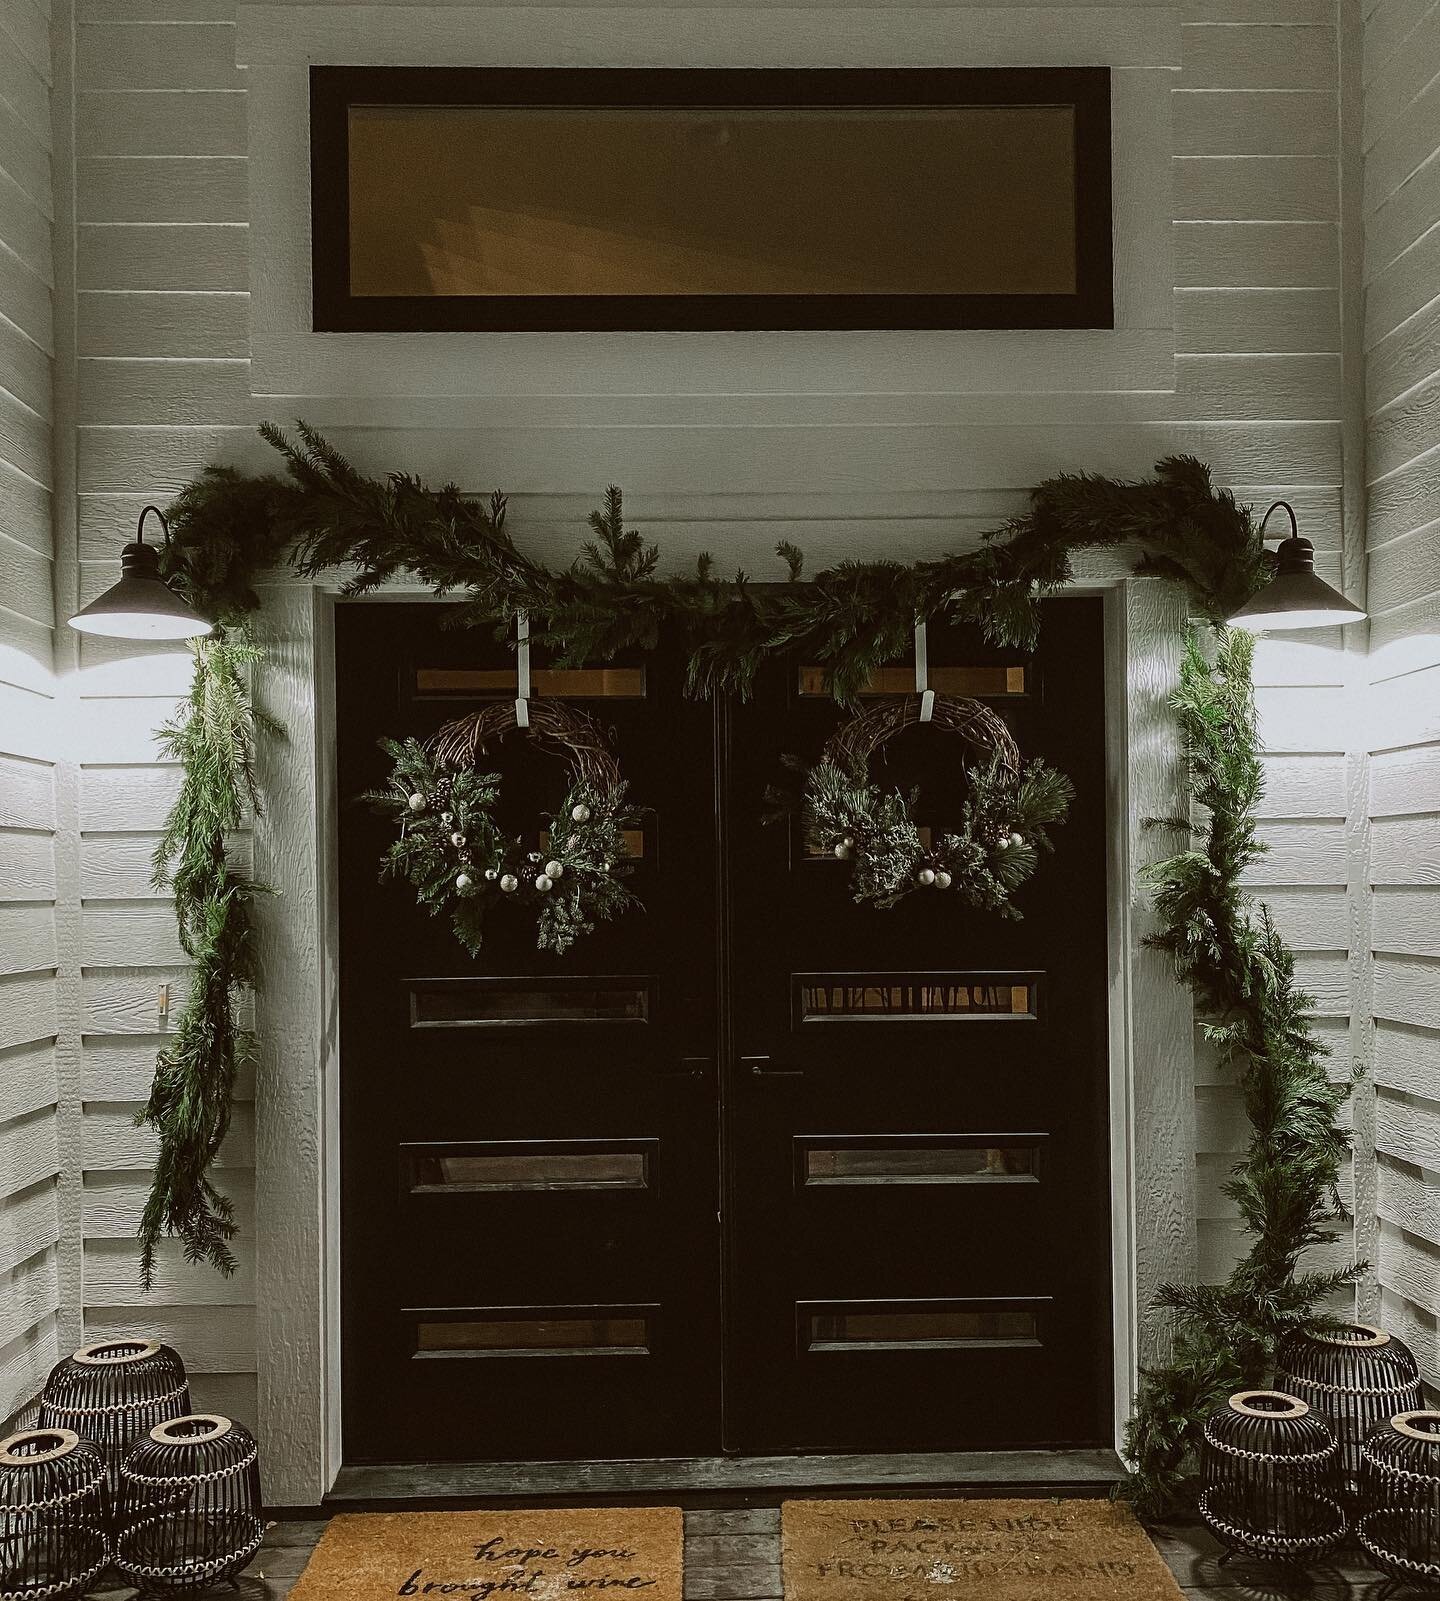 We still have 35 feet of this beautiful garland left from the weekend market. Super lush and I used 20 ft to create this look on our French front doors! $10 per foot dm me to claim! I&rsquo;ll post remaining wreaths tomorrow on my stories with prices